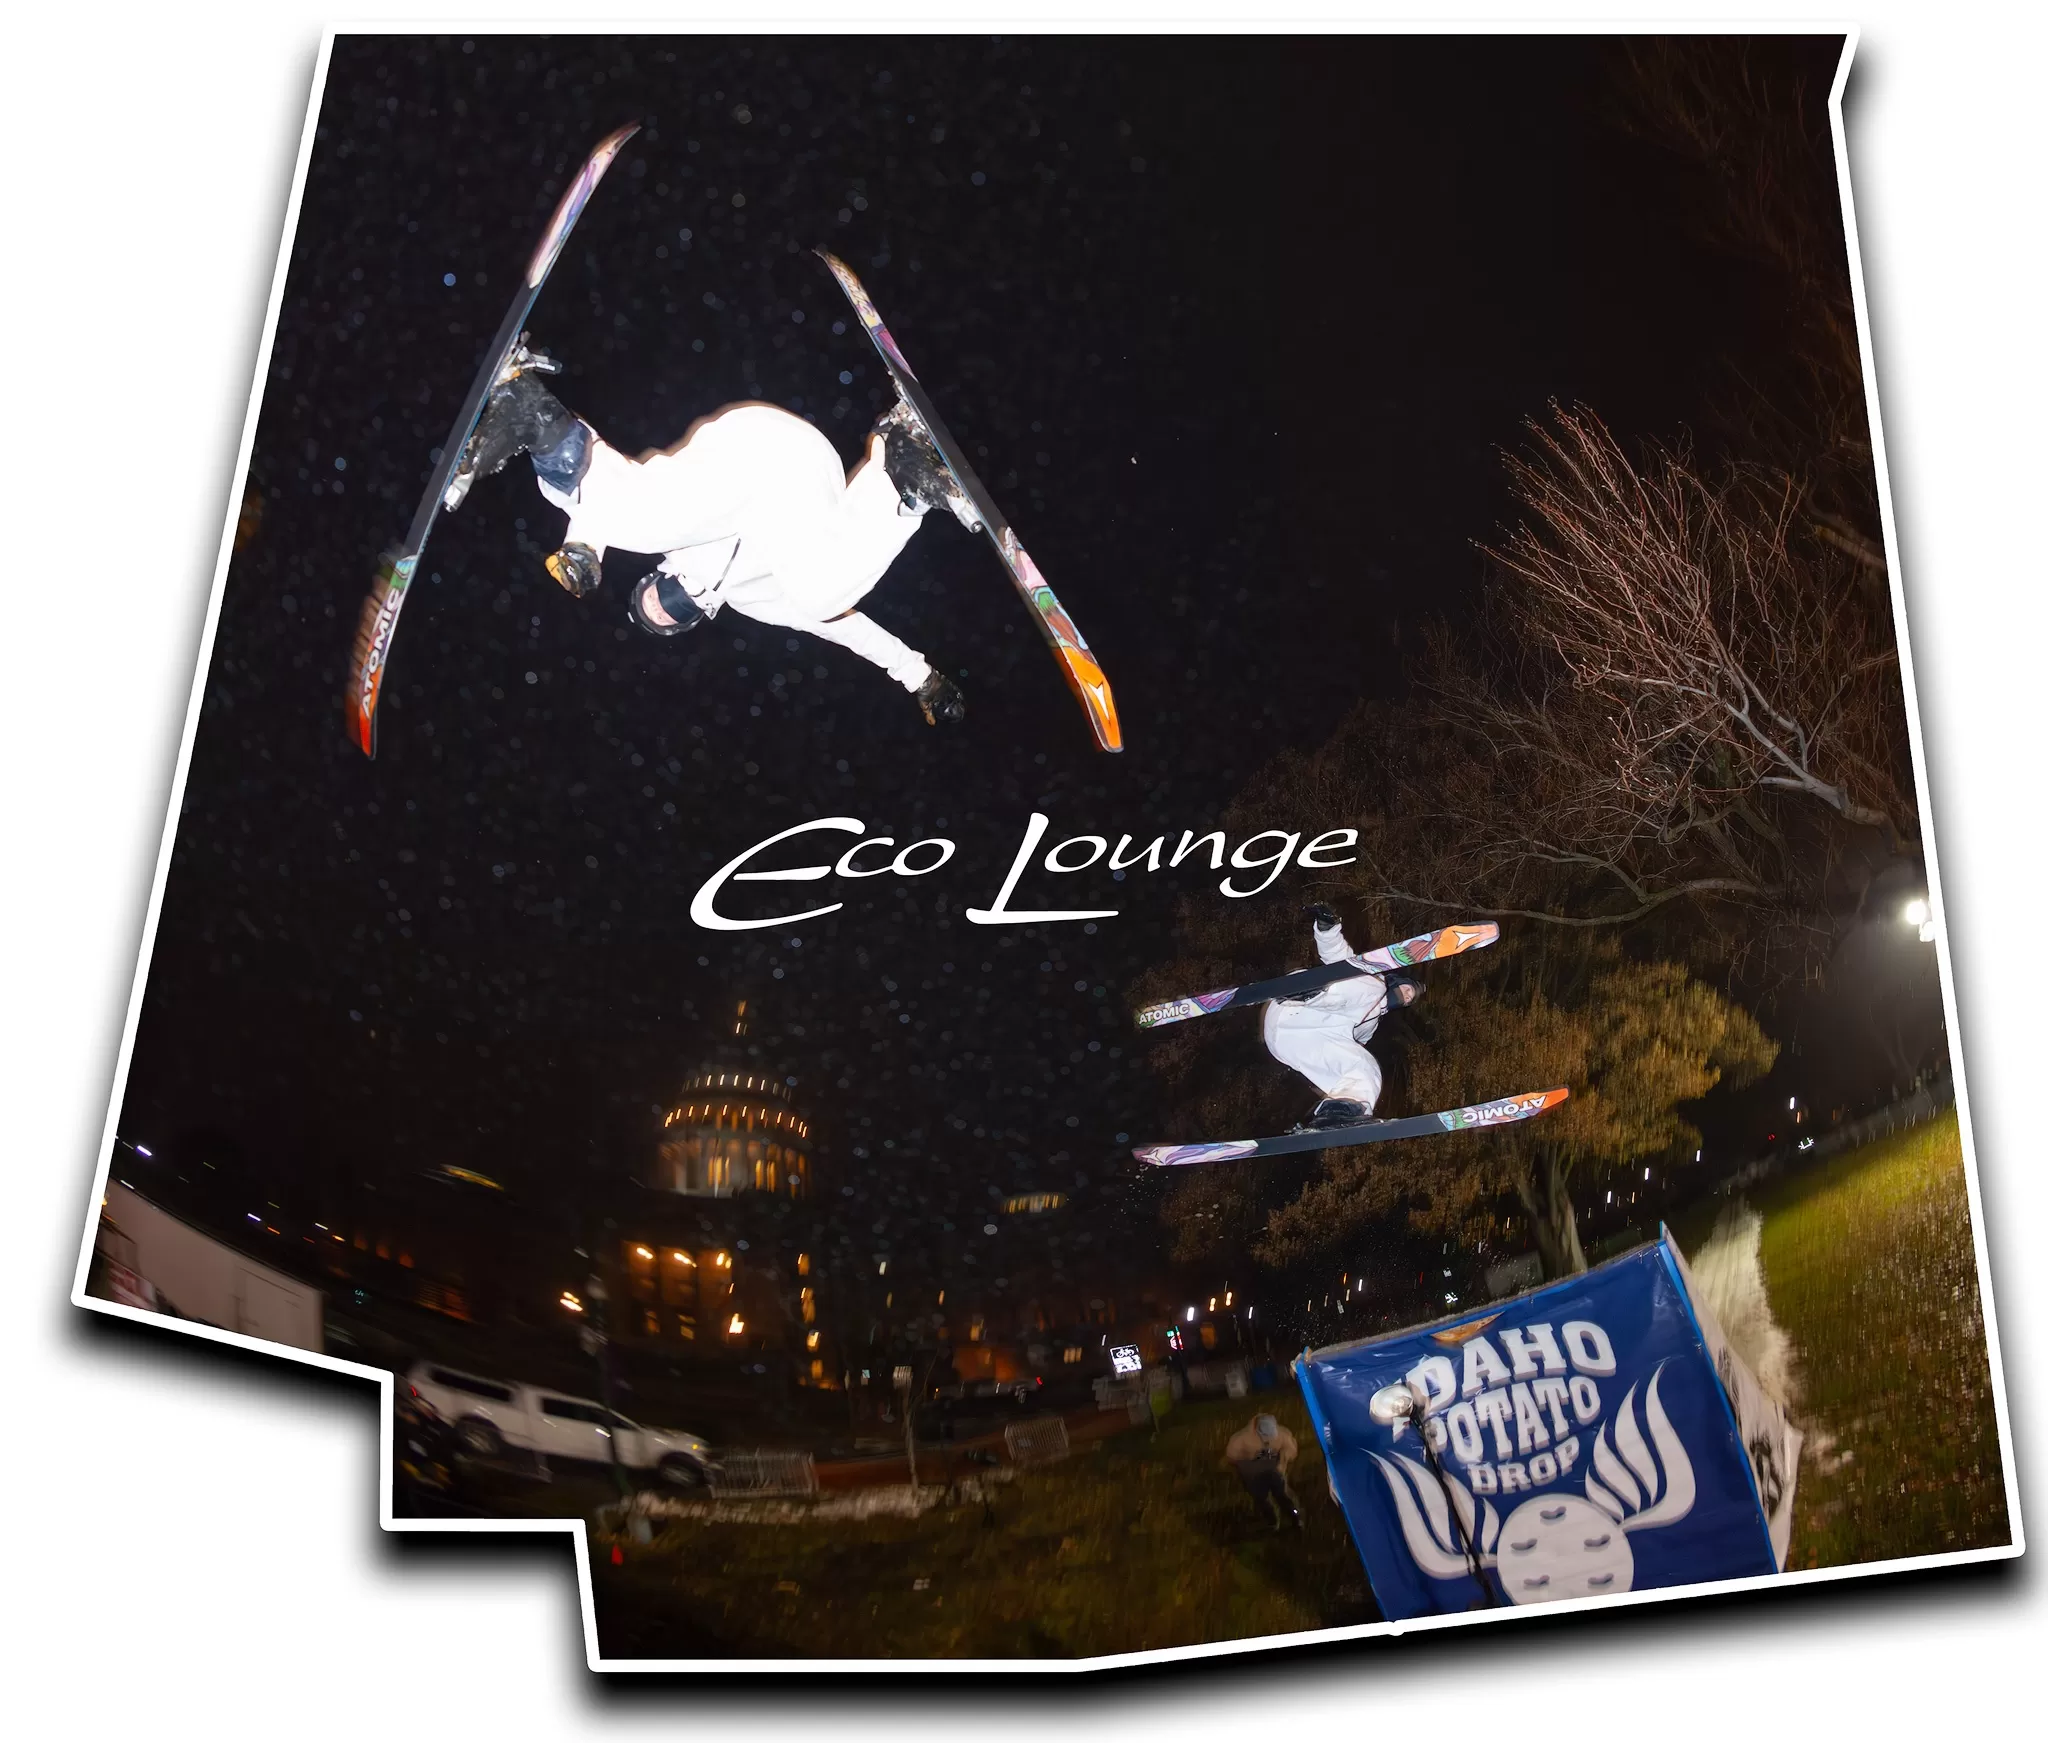 Jeff Gill hitting the "Urban Air" jump at the New Years Eve big air event in Boise